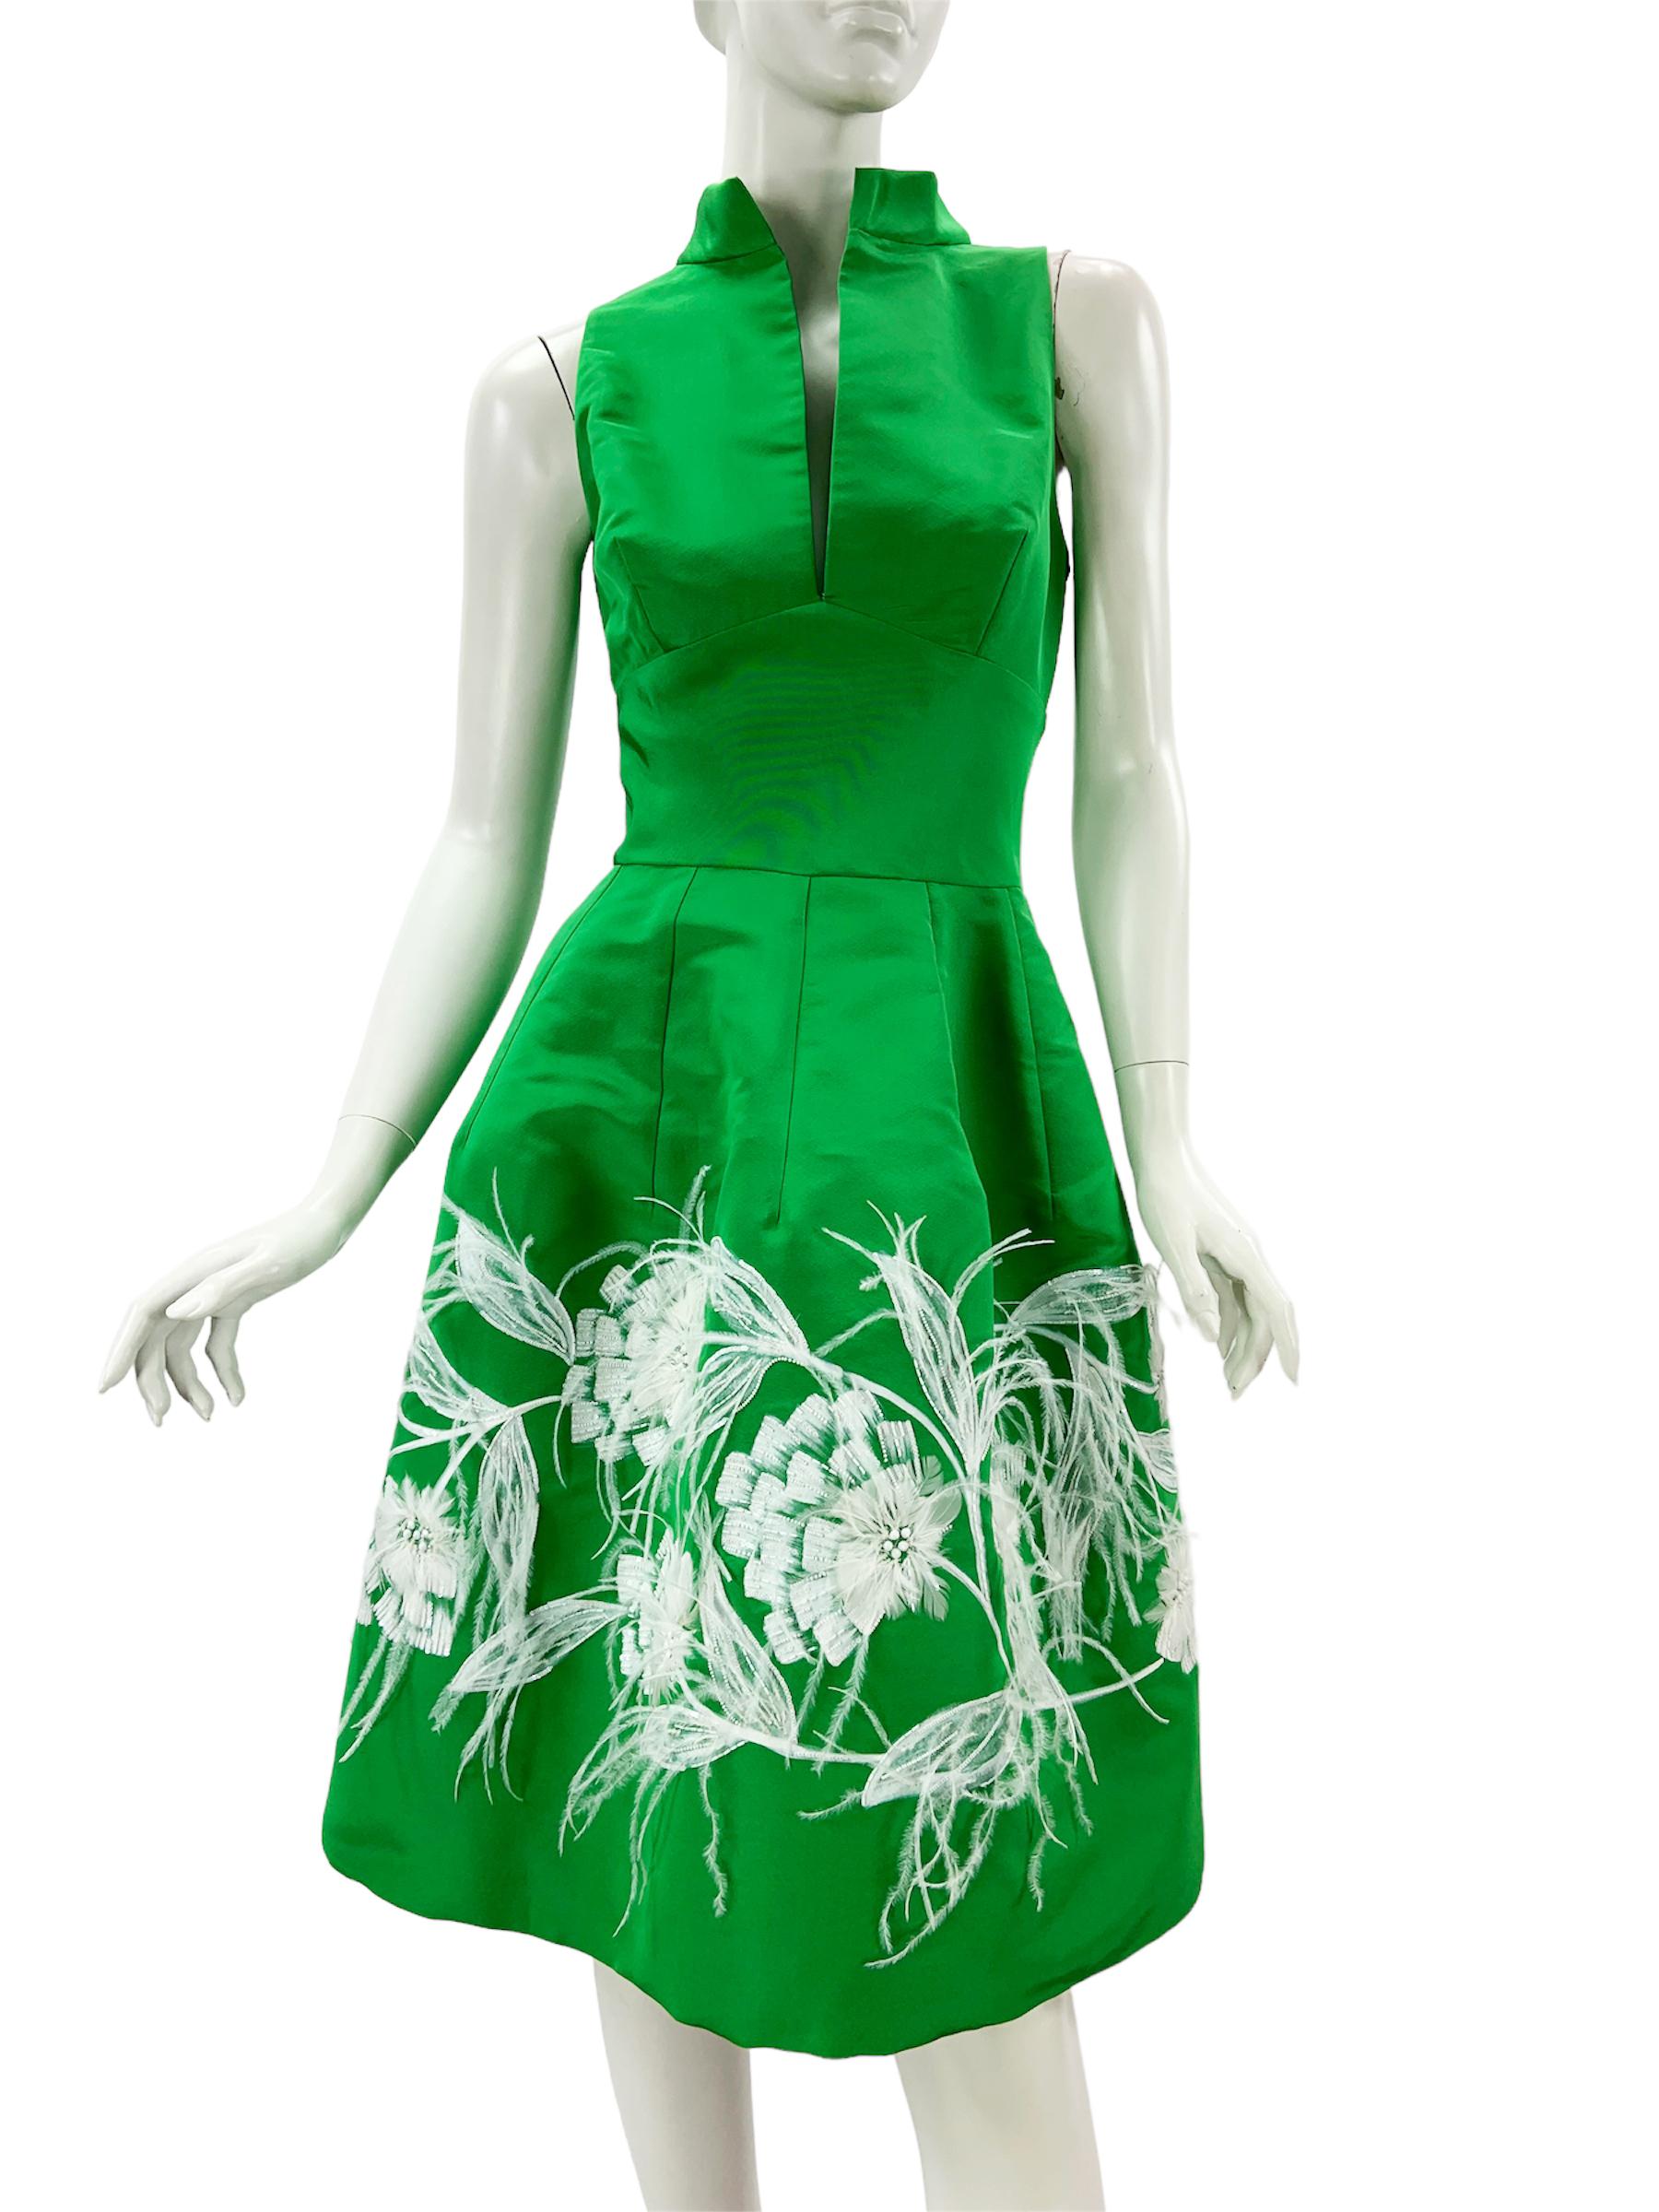 New Oscar de la Renta Green Silk Taffeta Embellished Cocktail Dress
S/S 2015 Collection
US size - 6 ( please check measurements)
100% Silk Taffeta, Ostrich Feathers, Beads and Sequins Embellishment, Hand Painted.
Plunge Neckline, Fully Lined, Flare